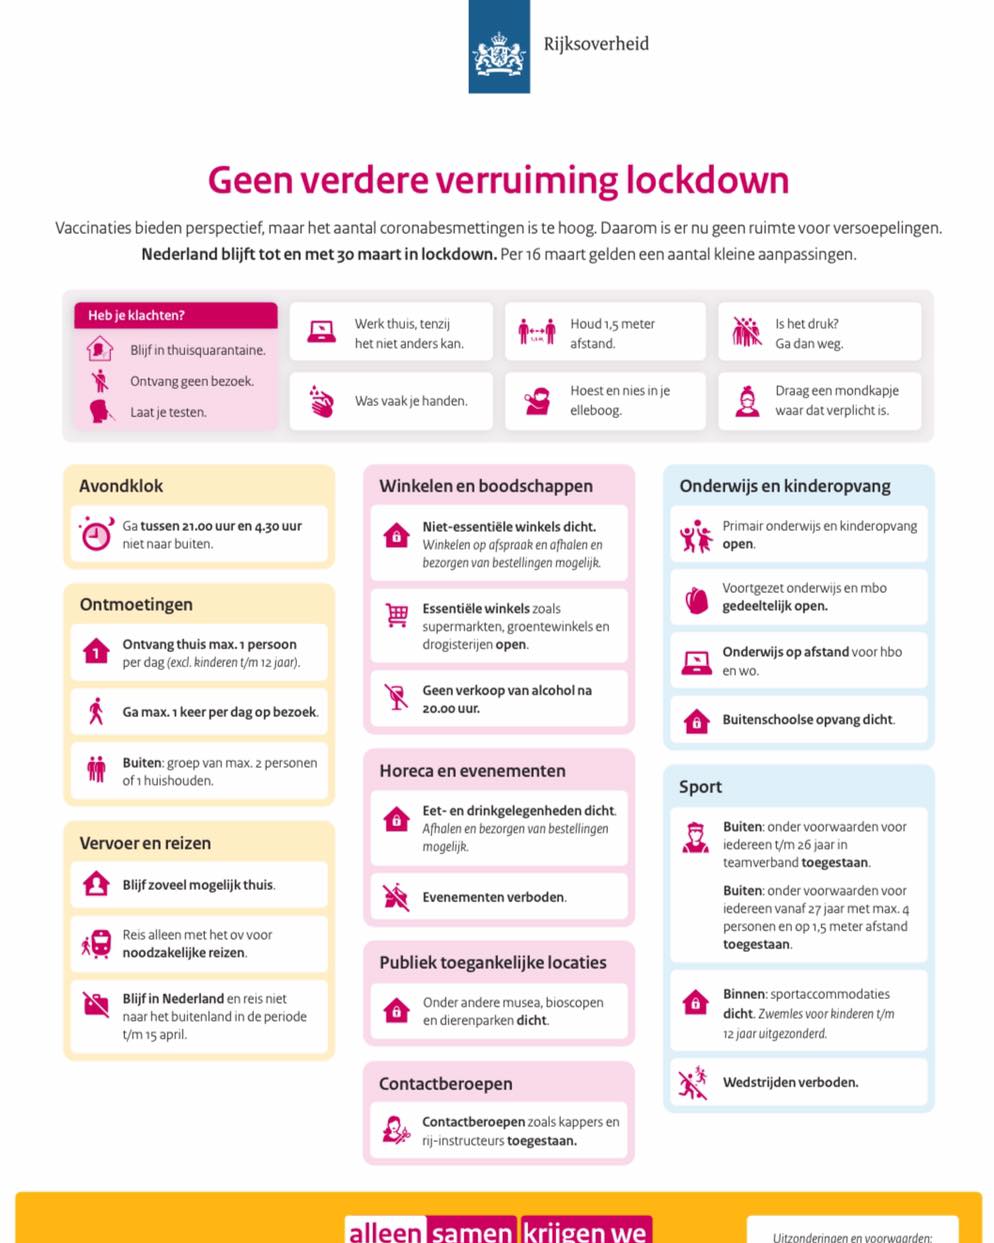 Quarantine and curfew have been extended in the Netherlands